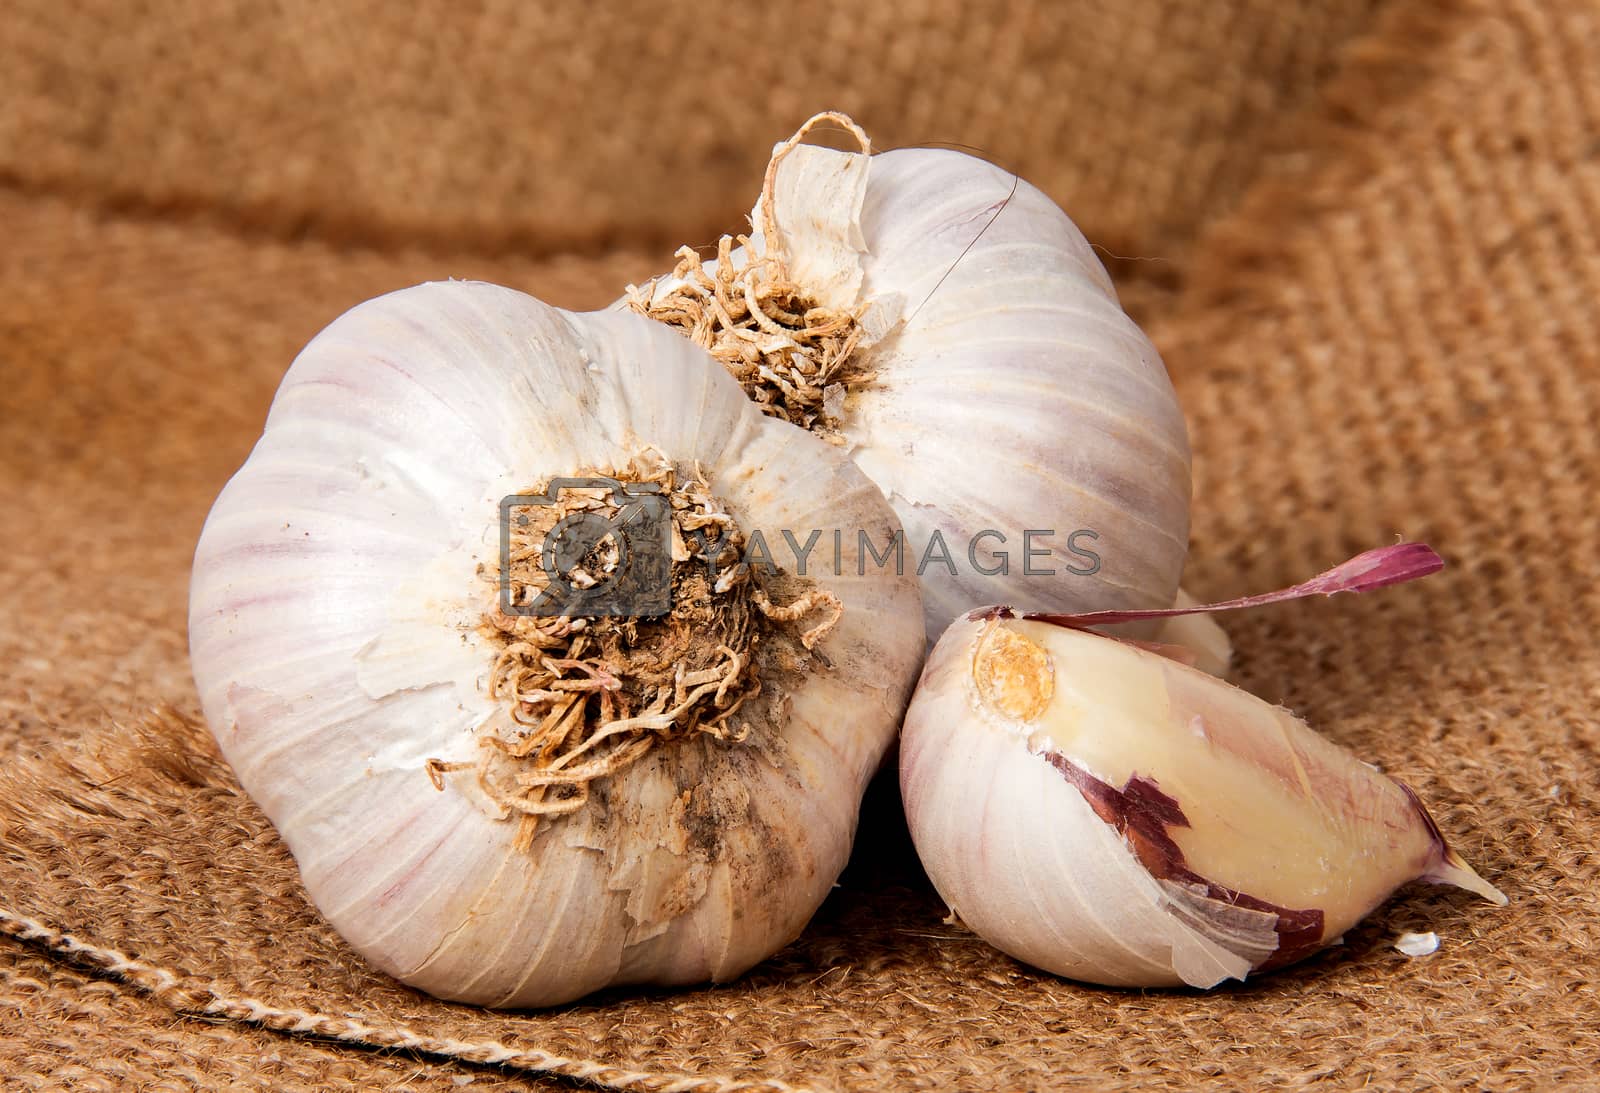 Royalty free image of Two heads of garlic and garlic clove on sackcloth by Cipariss